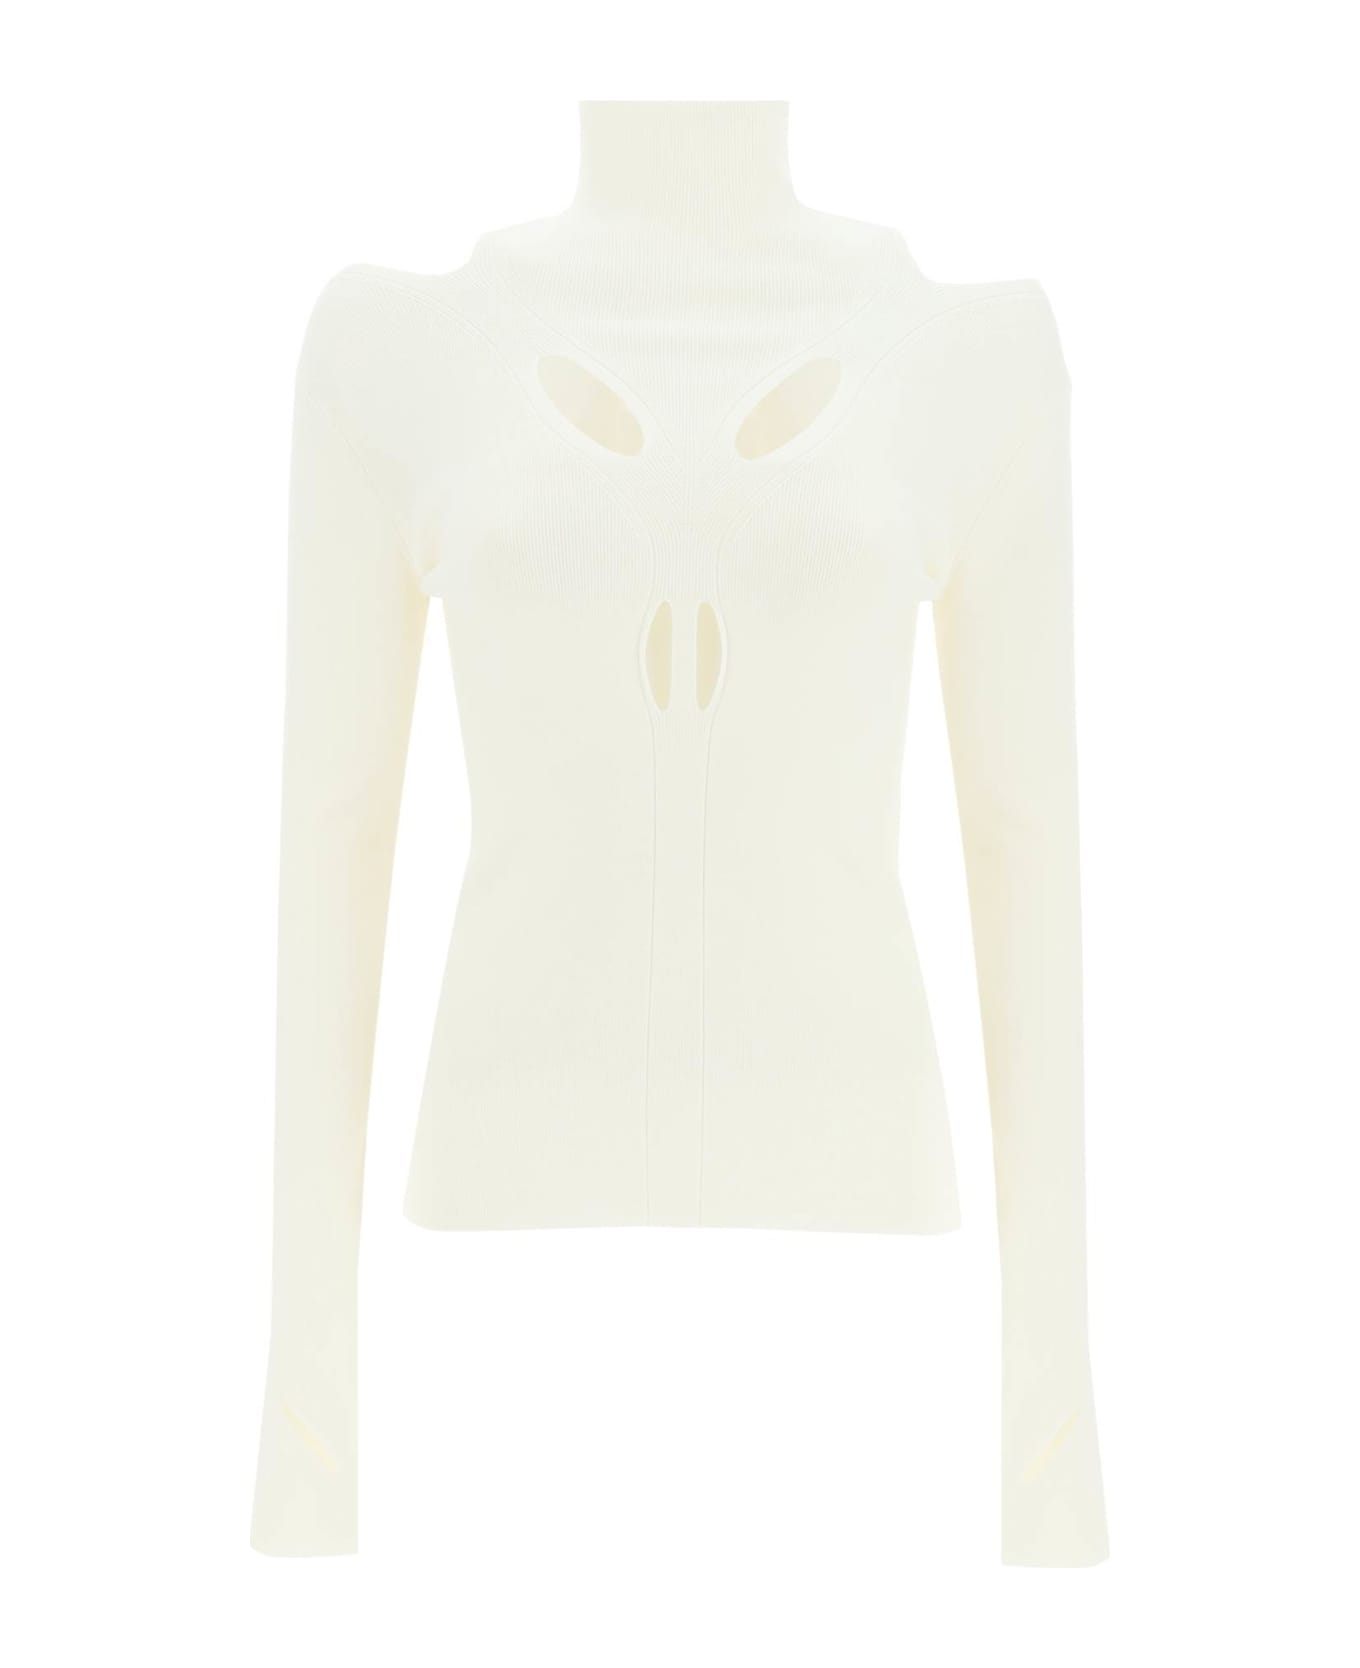 Dion Lee Cut-out Skivvy - IVORY (White)